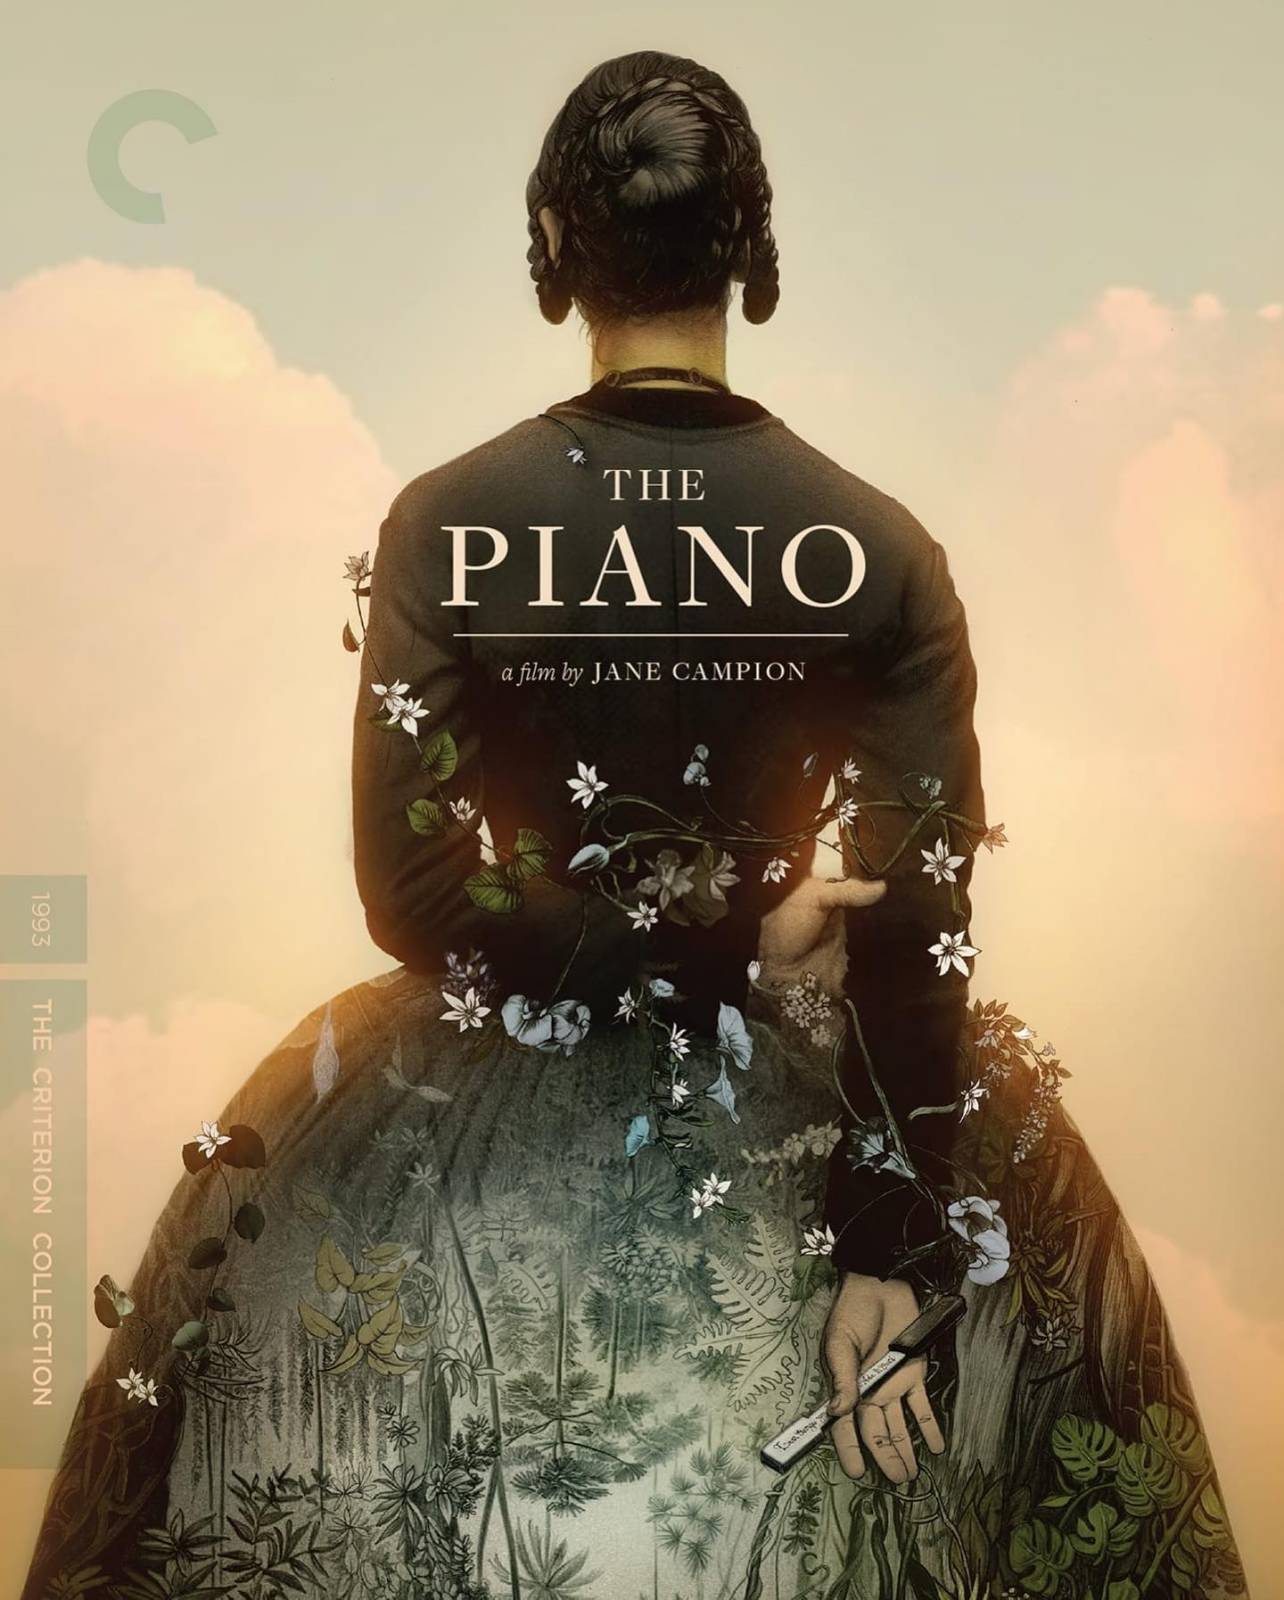 THE PIANO for The Criterion Collection